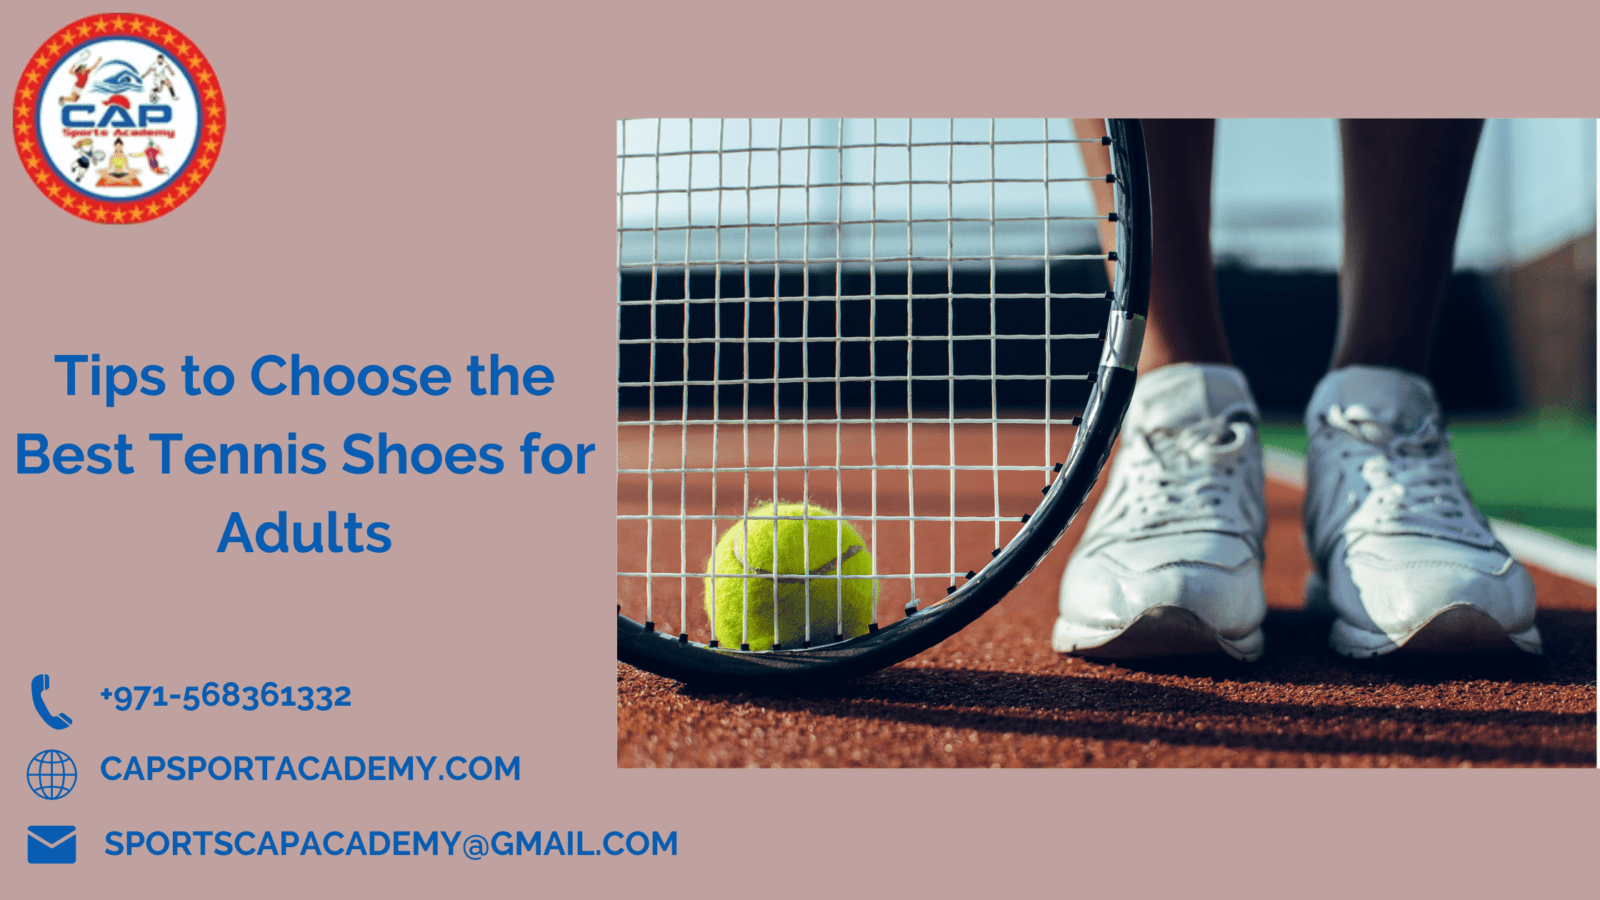 Tips to Choose the Best Tennis Shoes for Adults - CAP Sports Academy